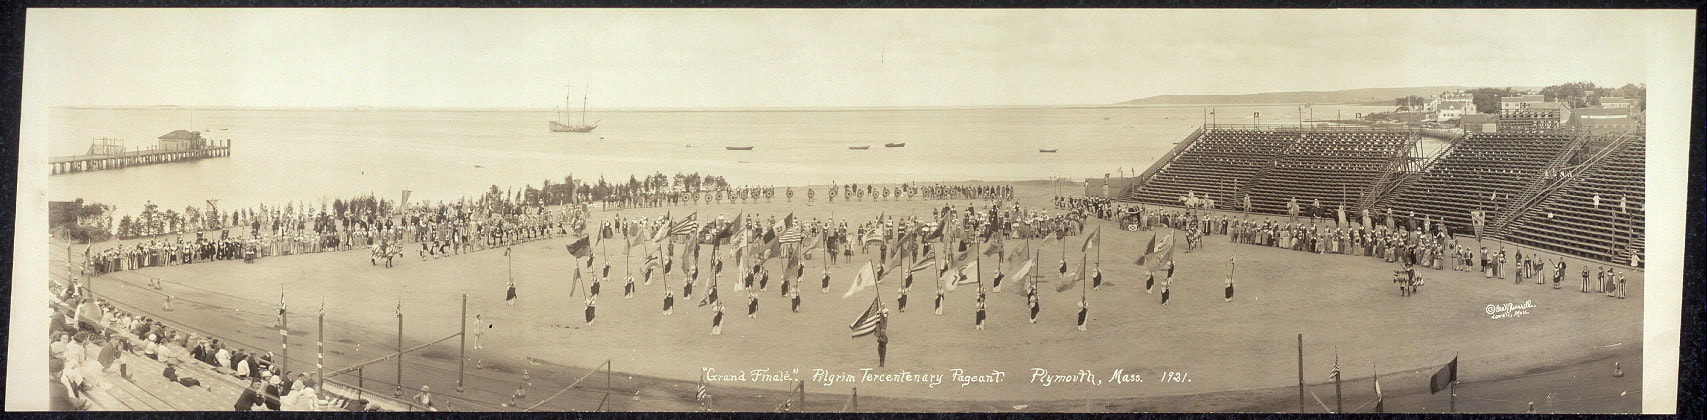 Plymouth Pageant, 1921